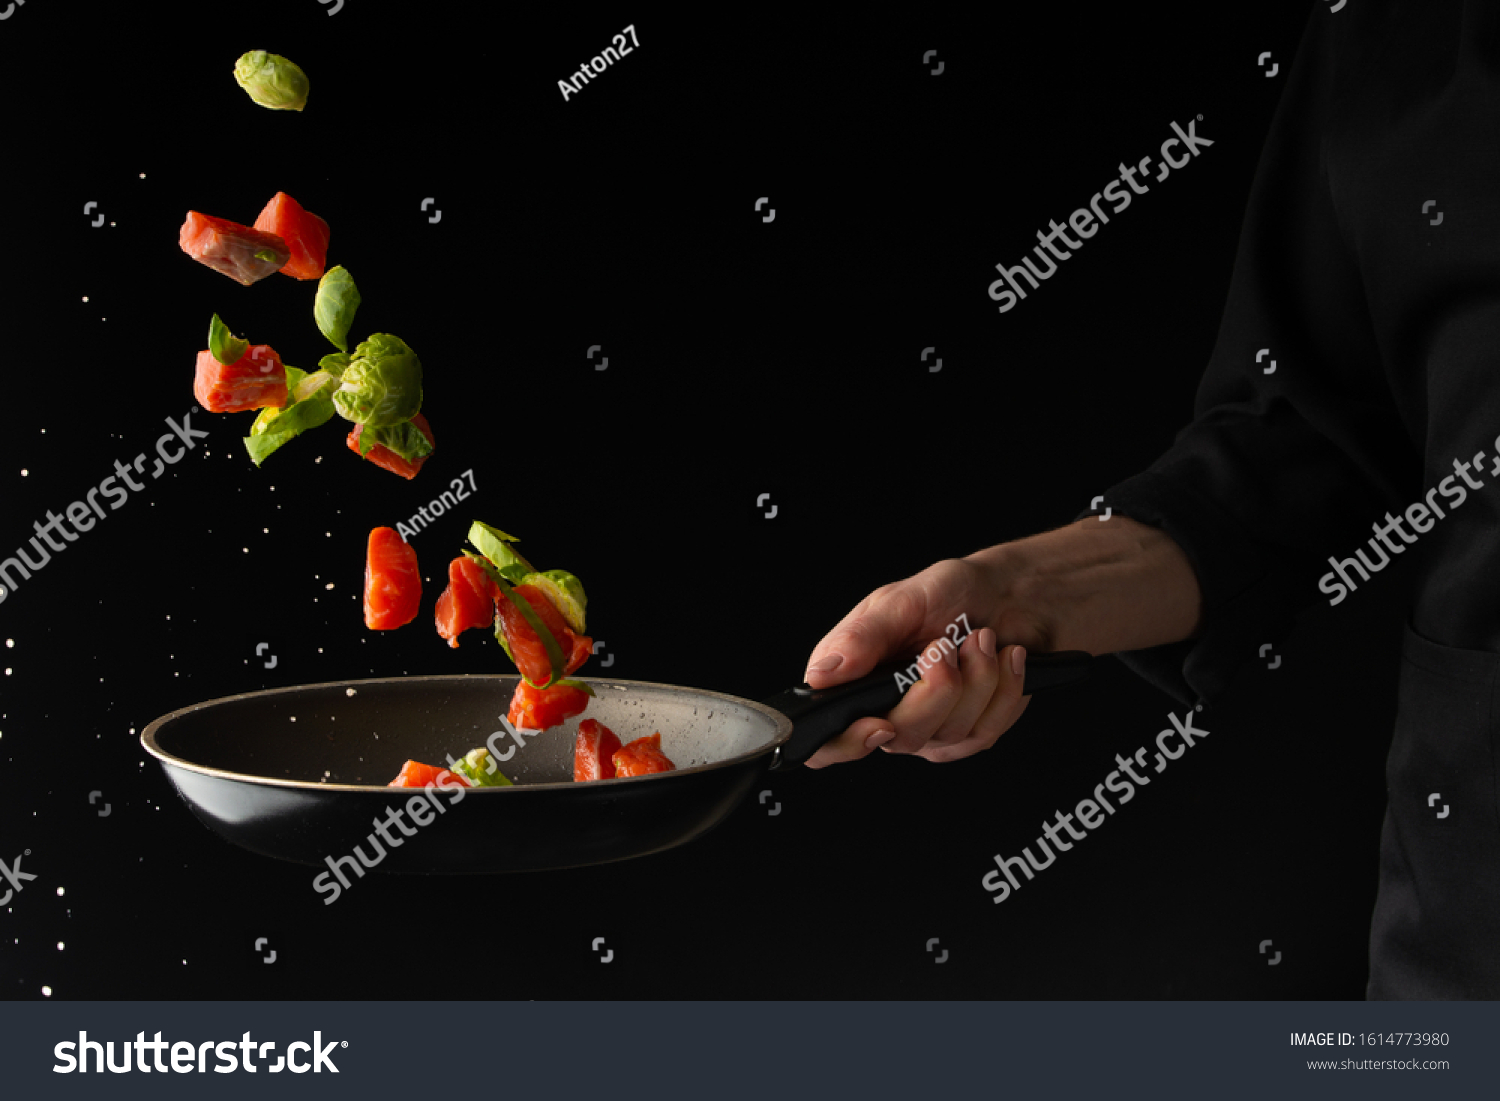 sea ​​or ocean food. Frying in a pan of salmon, with vegetables. Useful and tasty food. Culinary and gastronomy. Freezing in motion. On a black background, horizontal photo. #1614773980